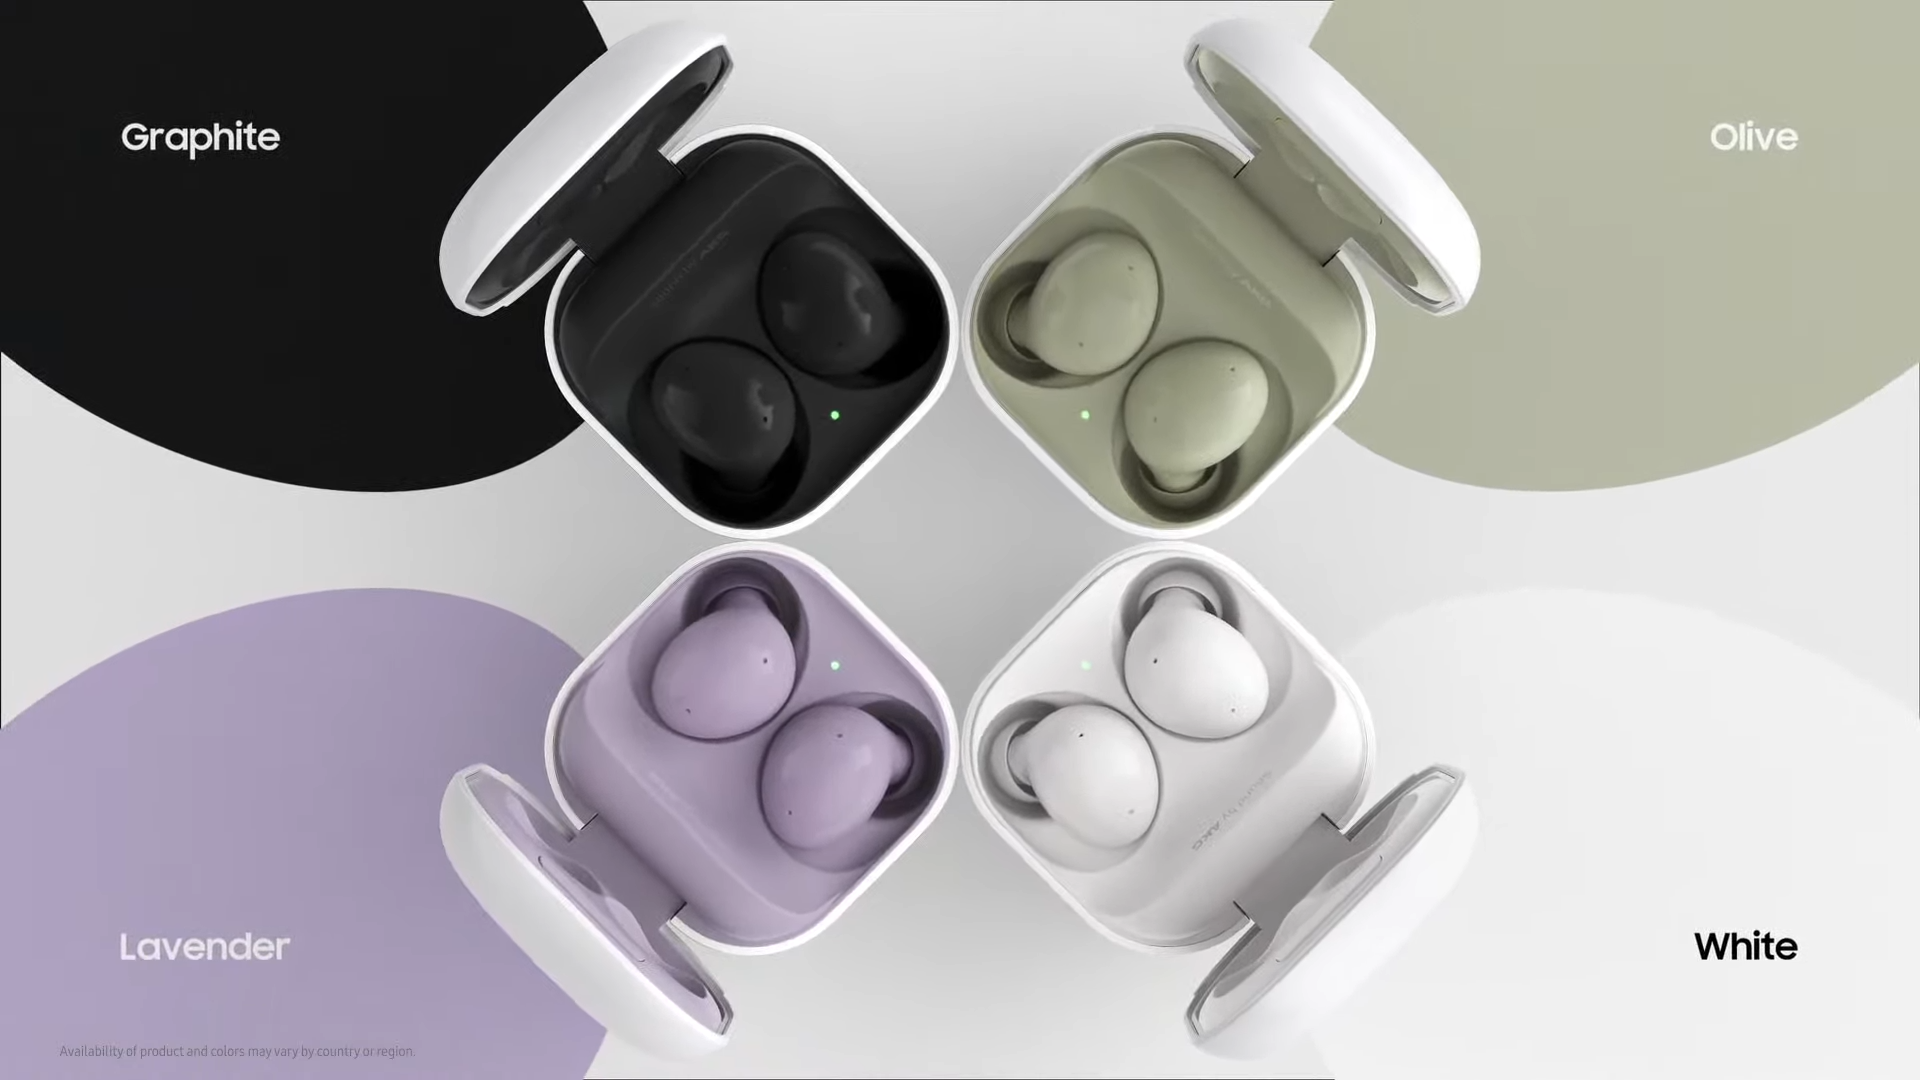 Samsung Offers Pro Tws Features For The Masses In The Galaxy Buds2